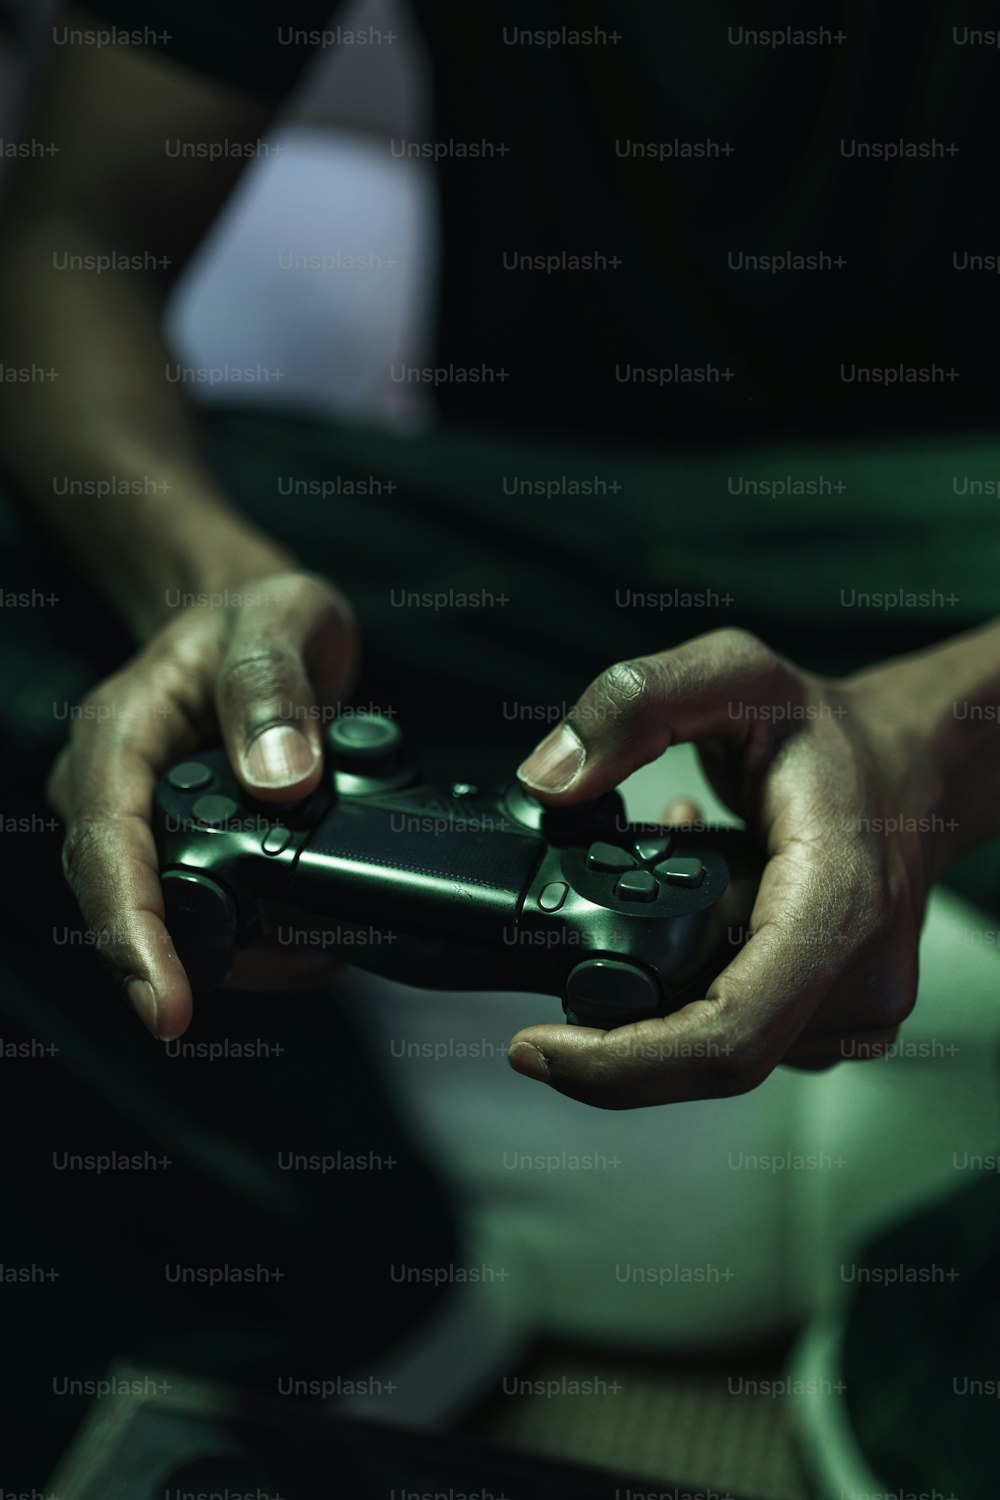 a person holding a video game controller in their hands